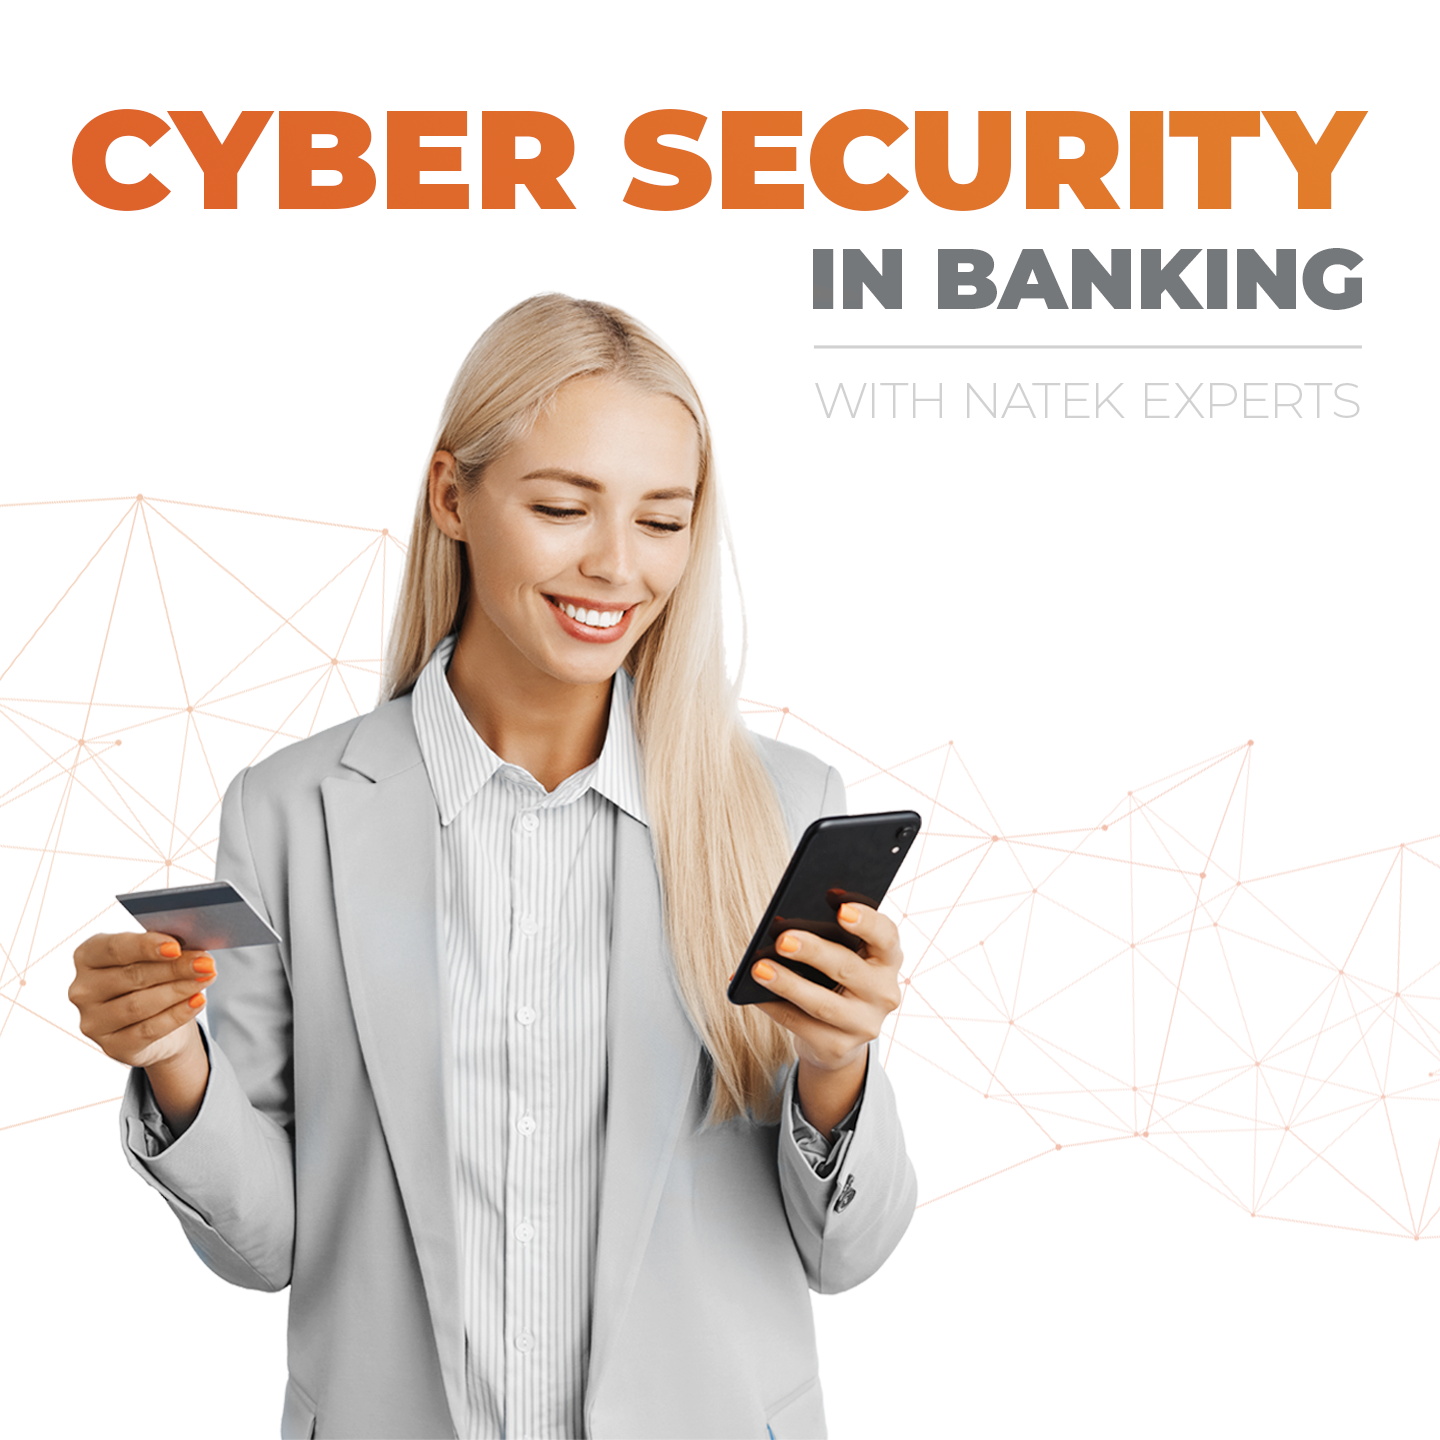 Cybersecurity in banking - how to prevent cyber threats